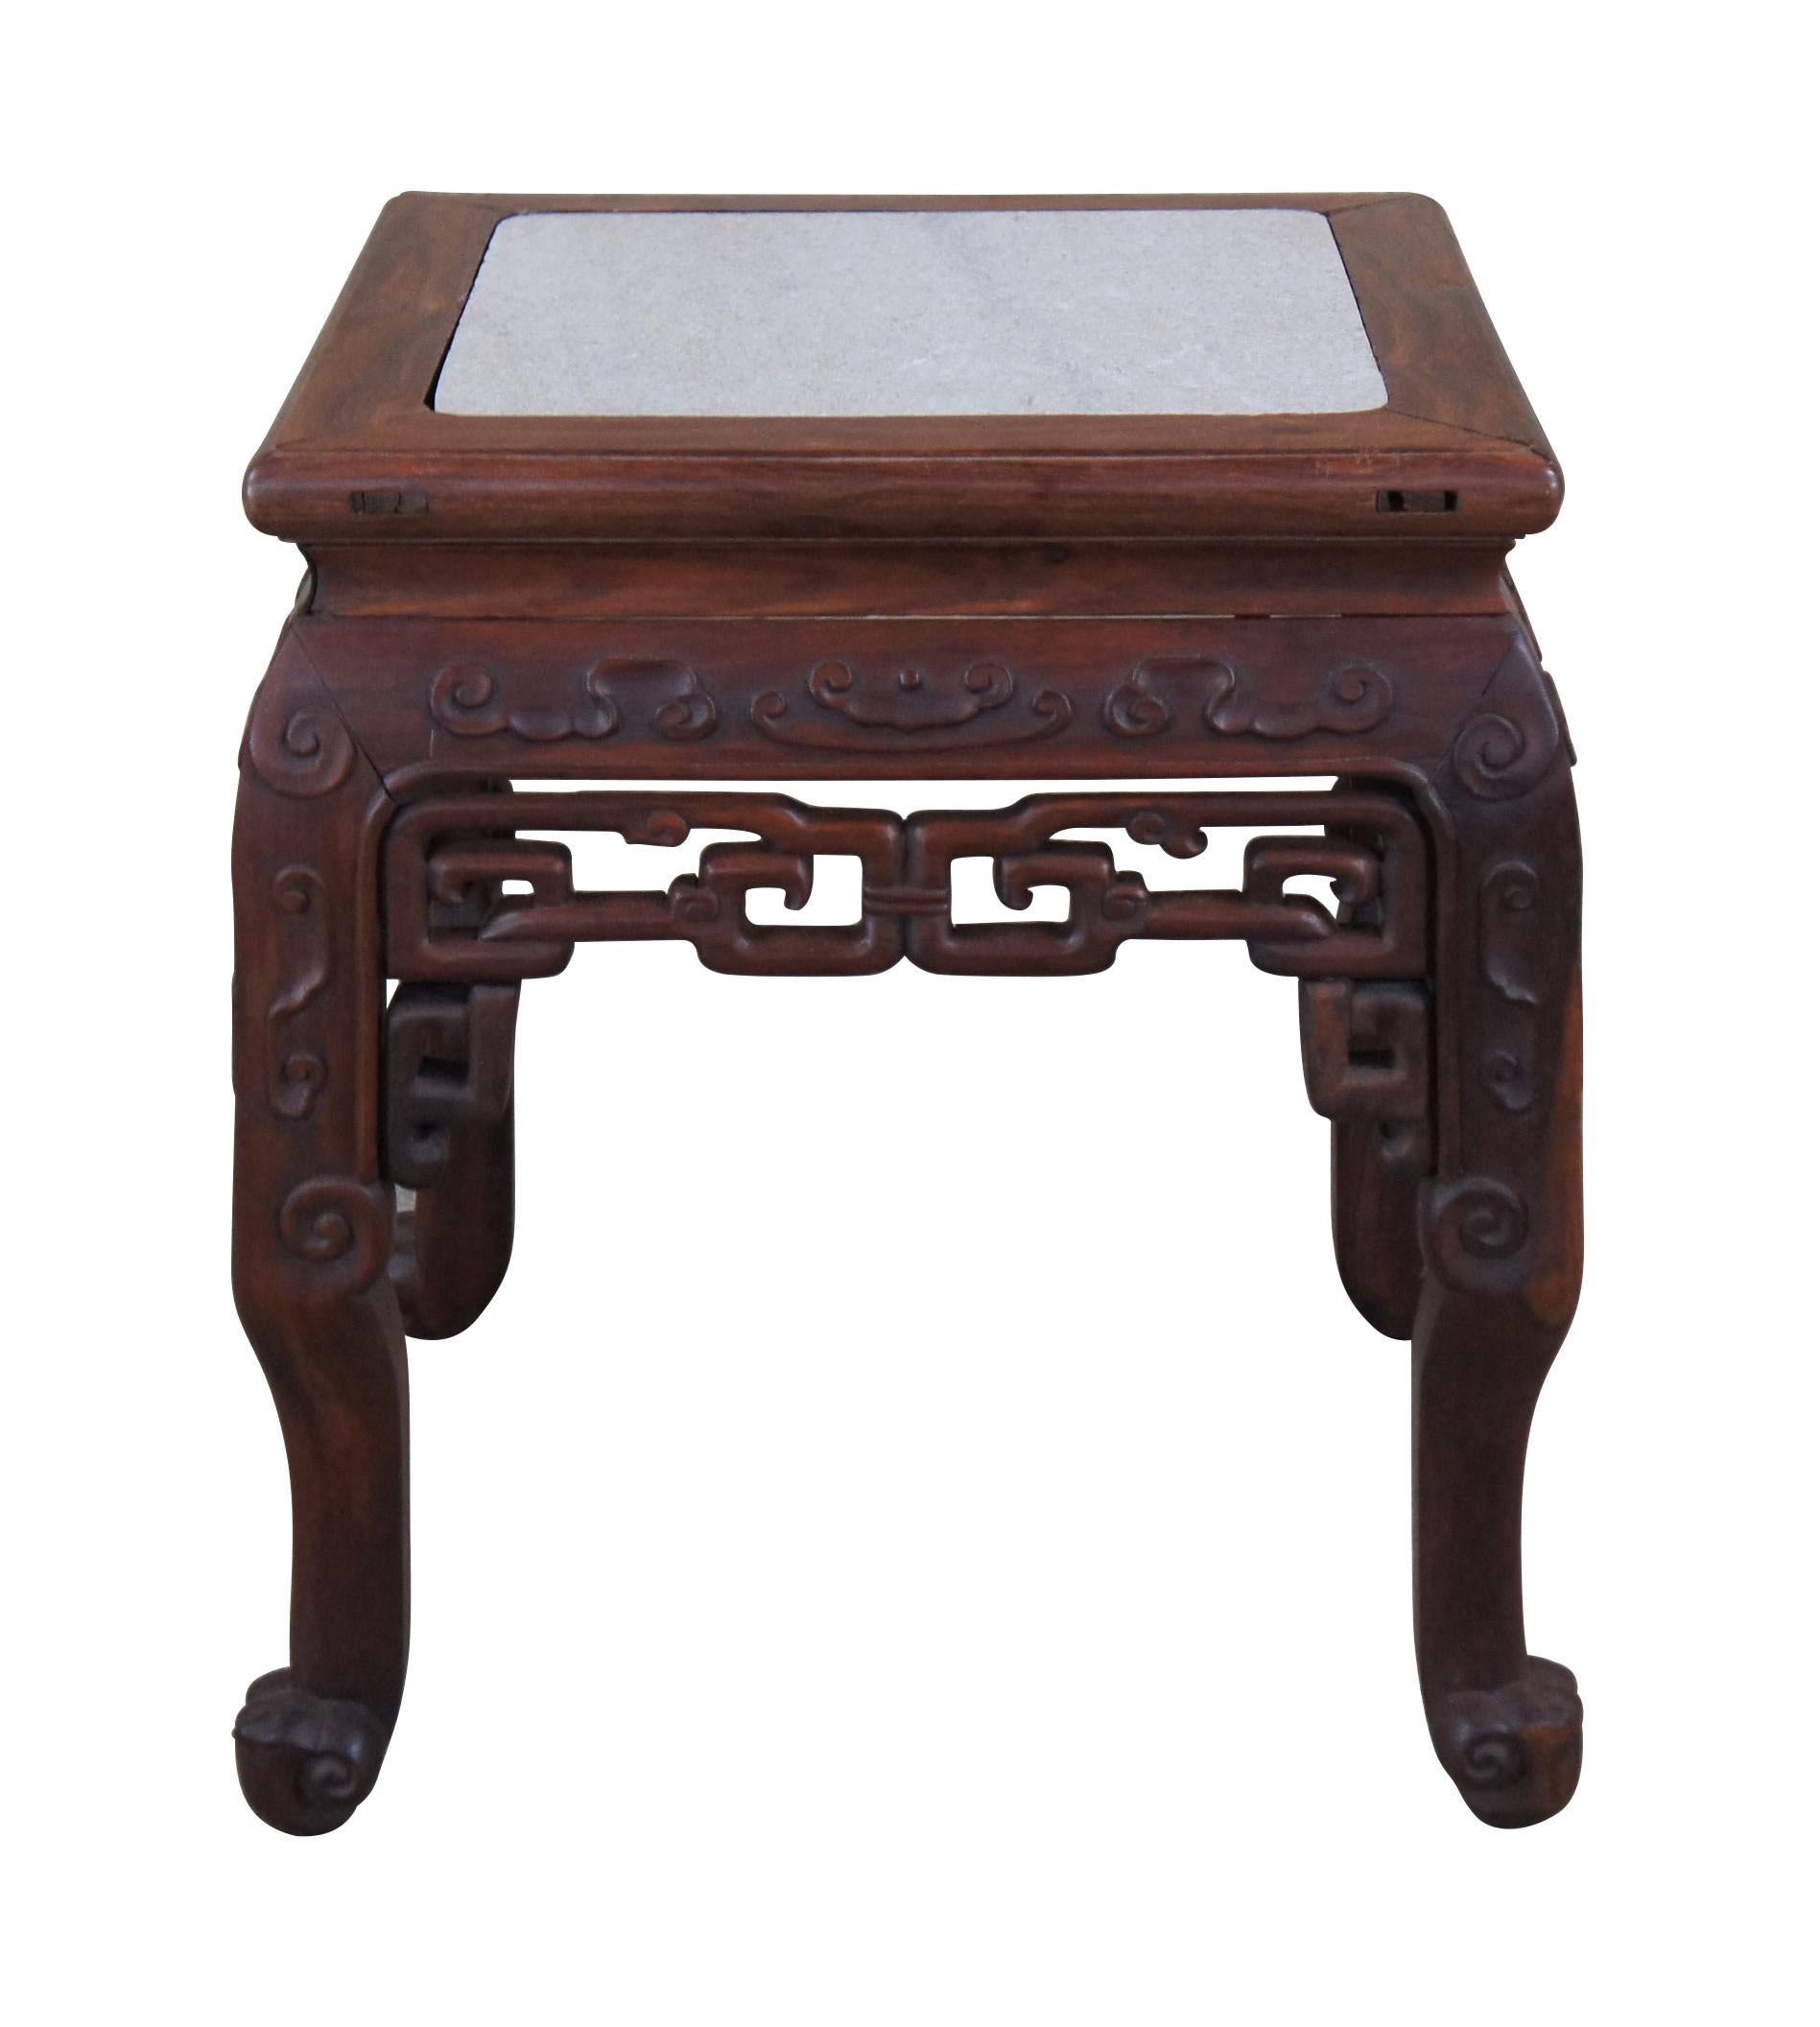 An impressive early 20th century rosewood table or stand.  Features a beautiful hardwood frame with inset marble top, low relief carvings and pierced scrolling spandrels.  A versatile piece that works well as a side table, stool, sculpture